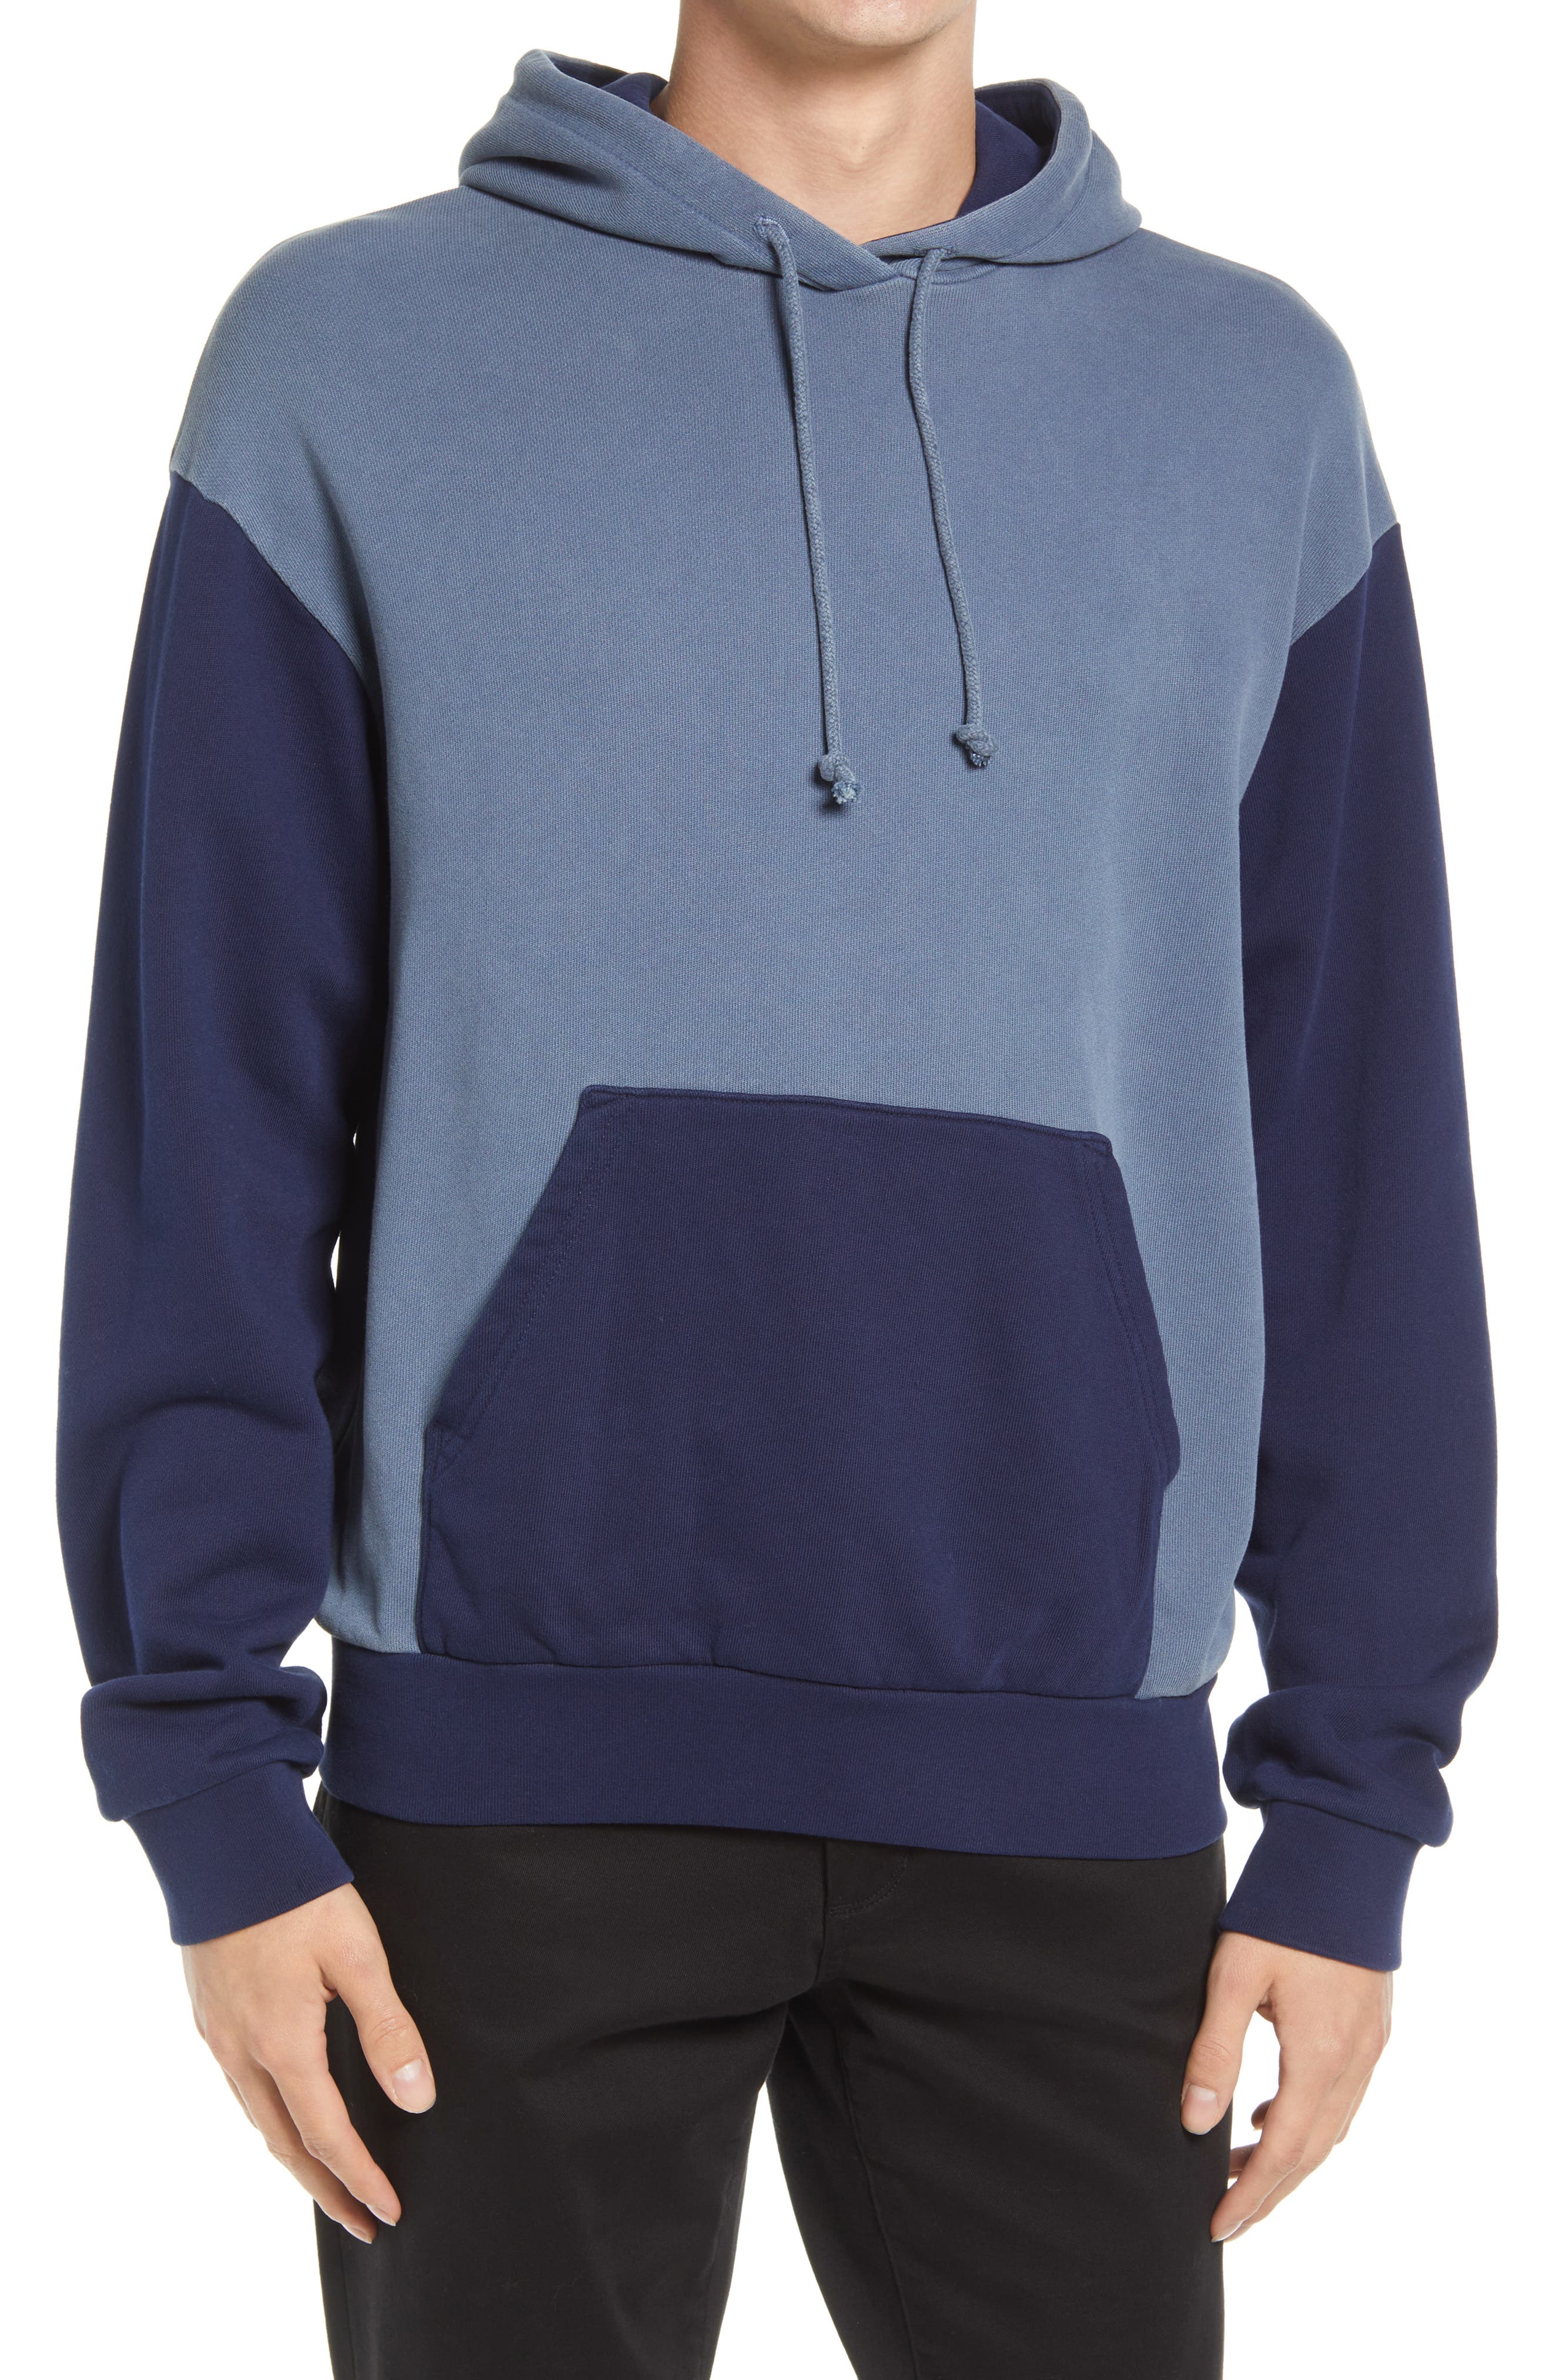 John Elliott 1992 Hoodie in Pacific at Nordstrom, Size Small